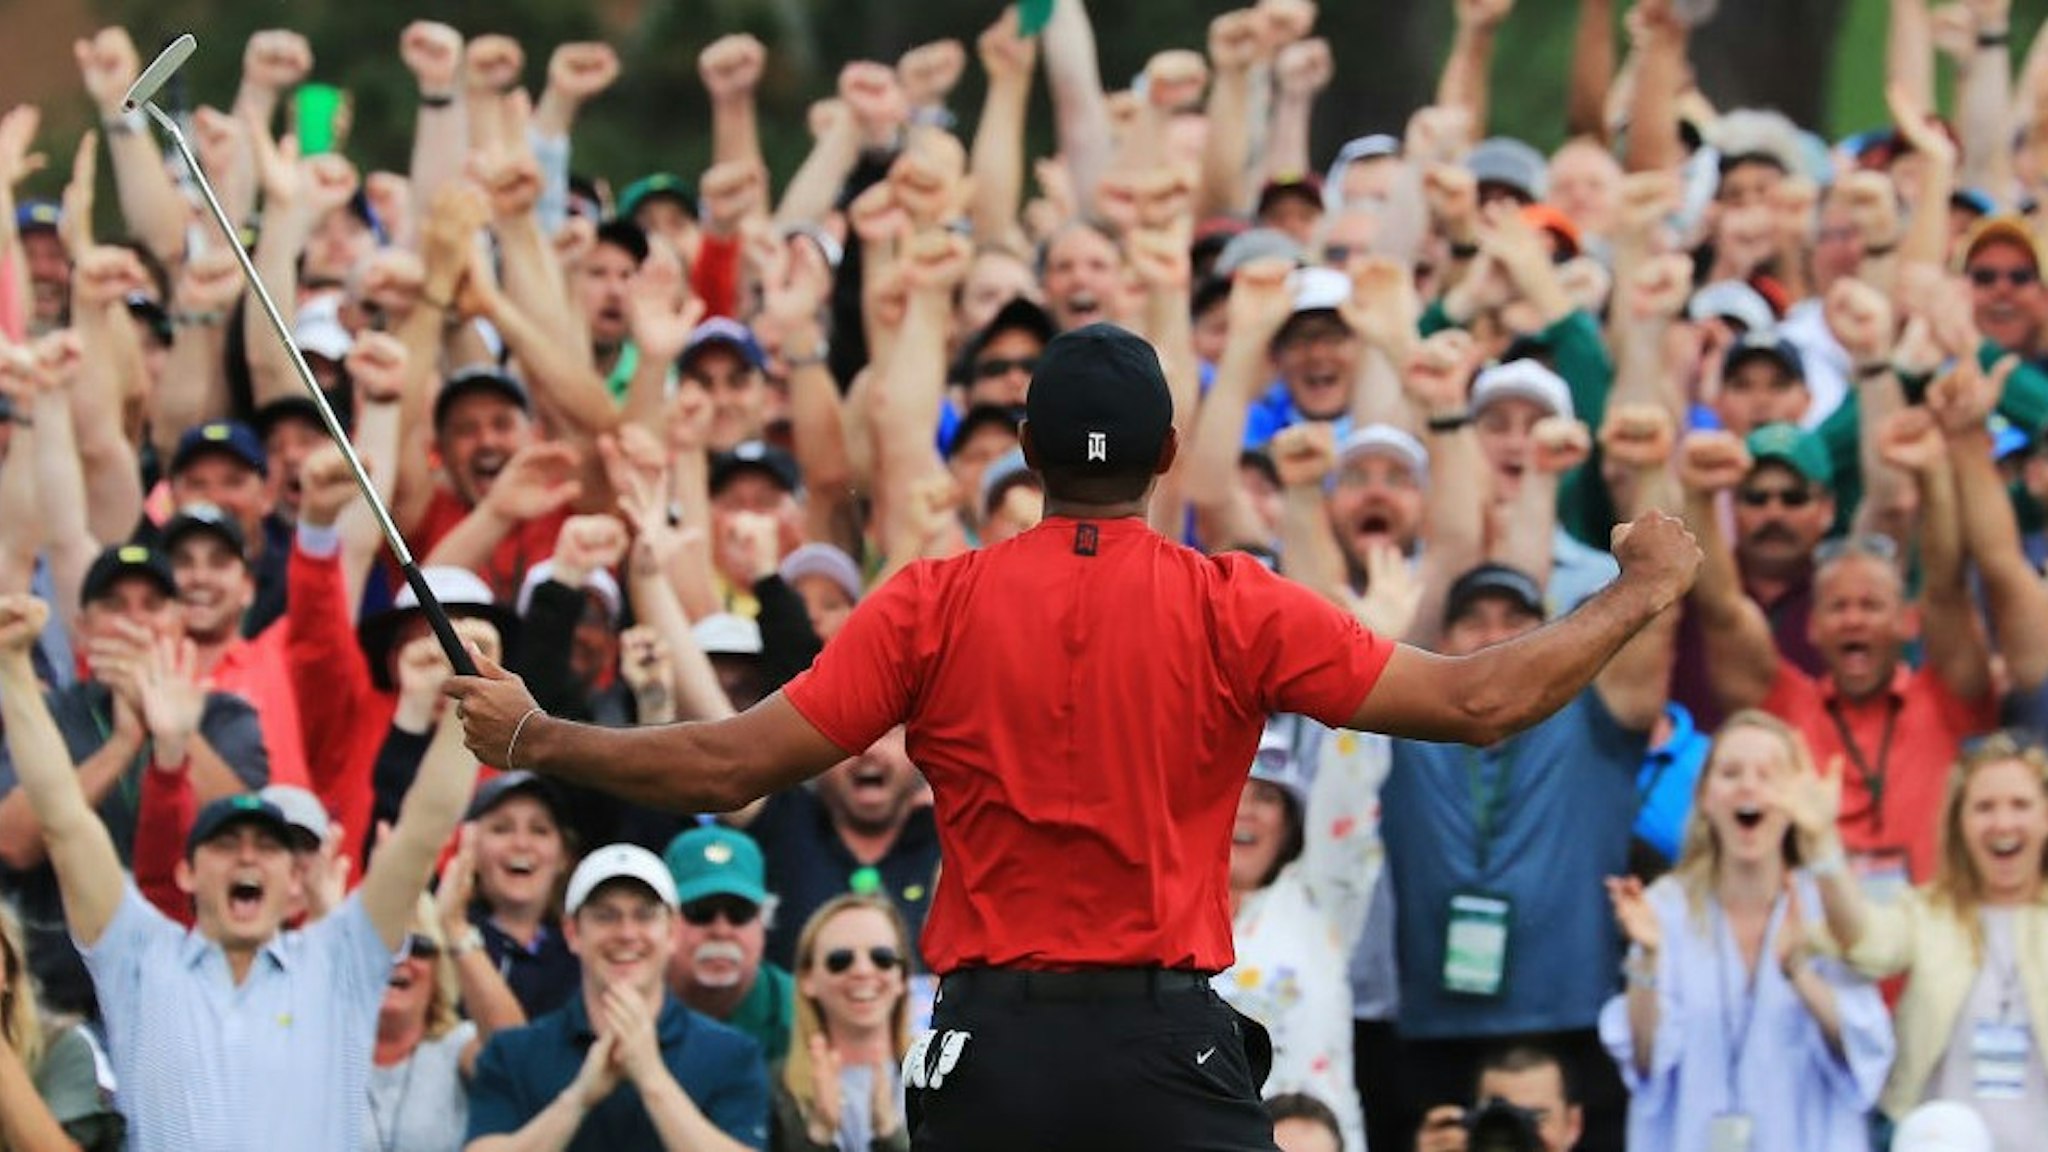 AUGUSTA, GEORGIA - APRIL 14: Patrons cheer as Tiger Woods of the United States celebrates after sinking his putt on the 18th green to win during the final round of the Masters at Augusta National Golf Club on April 14, 2019 in Augusta, Georgia. (Photo by